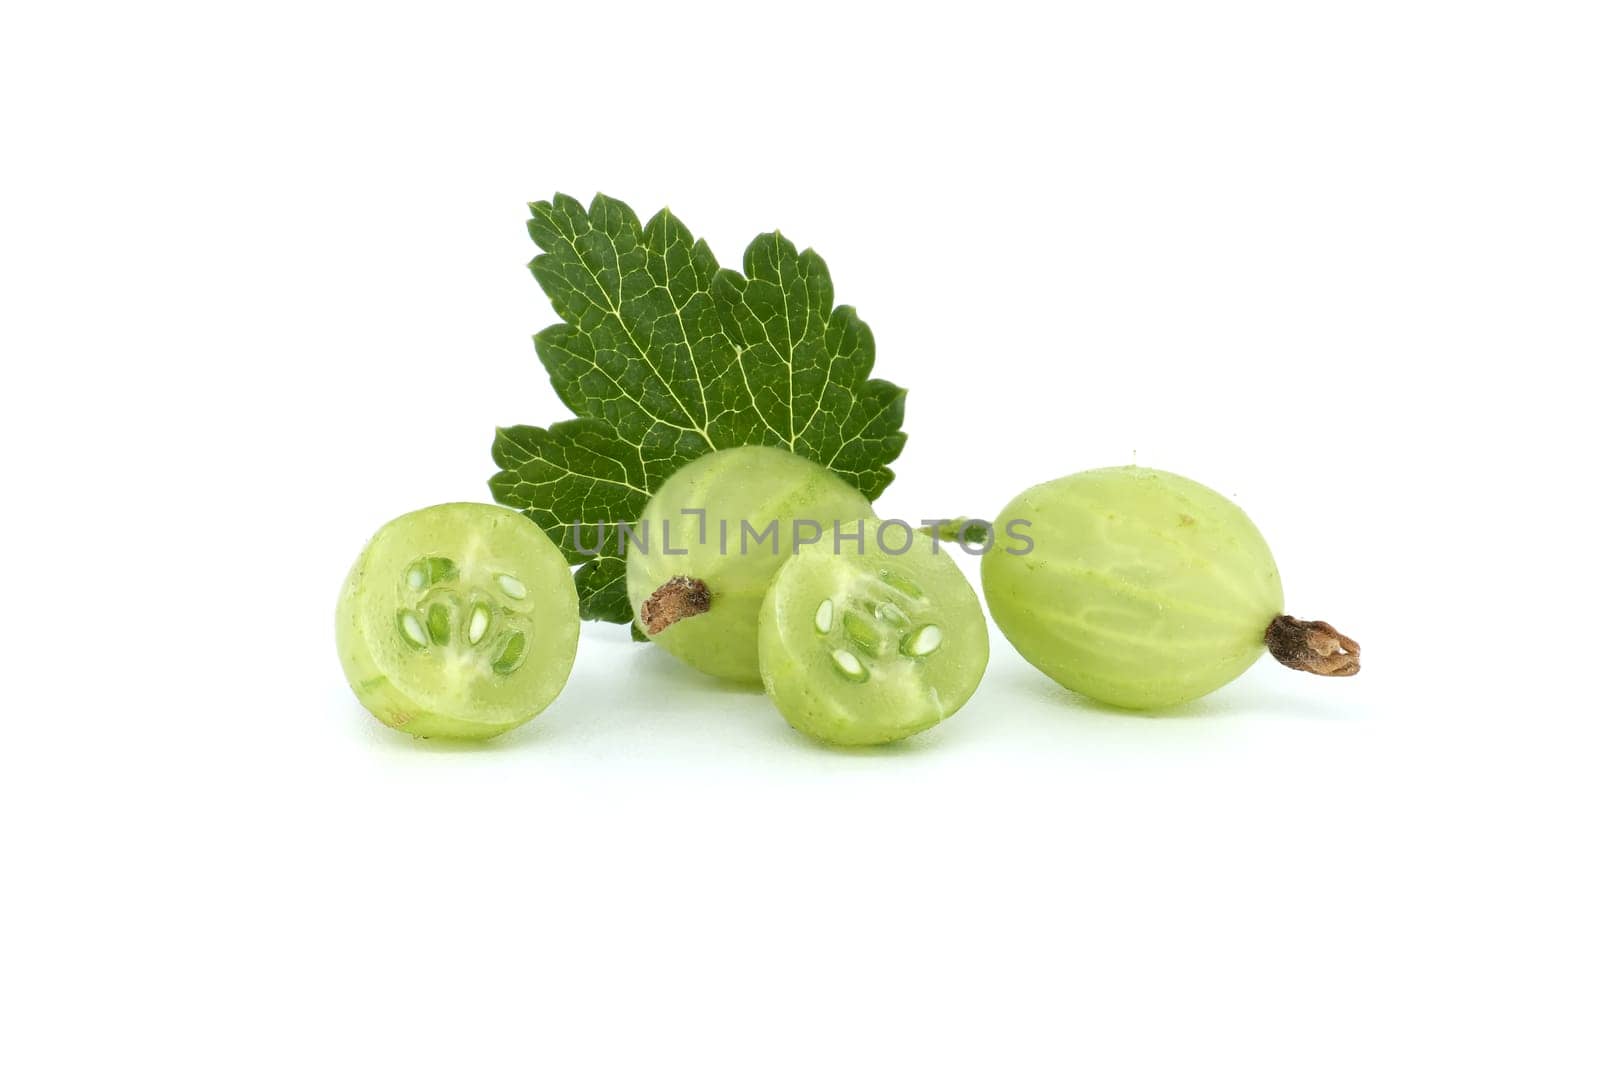 Fresh green gooseberries with a green leaf on a white background. Includes whole and sliced berries, showcasing seeds and texture.